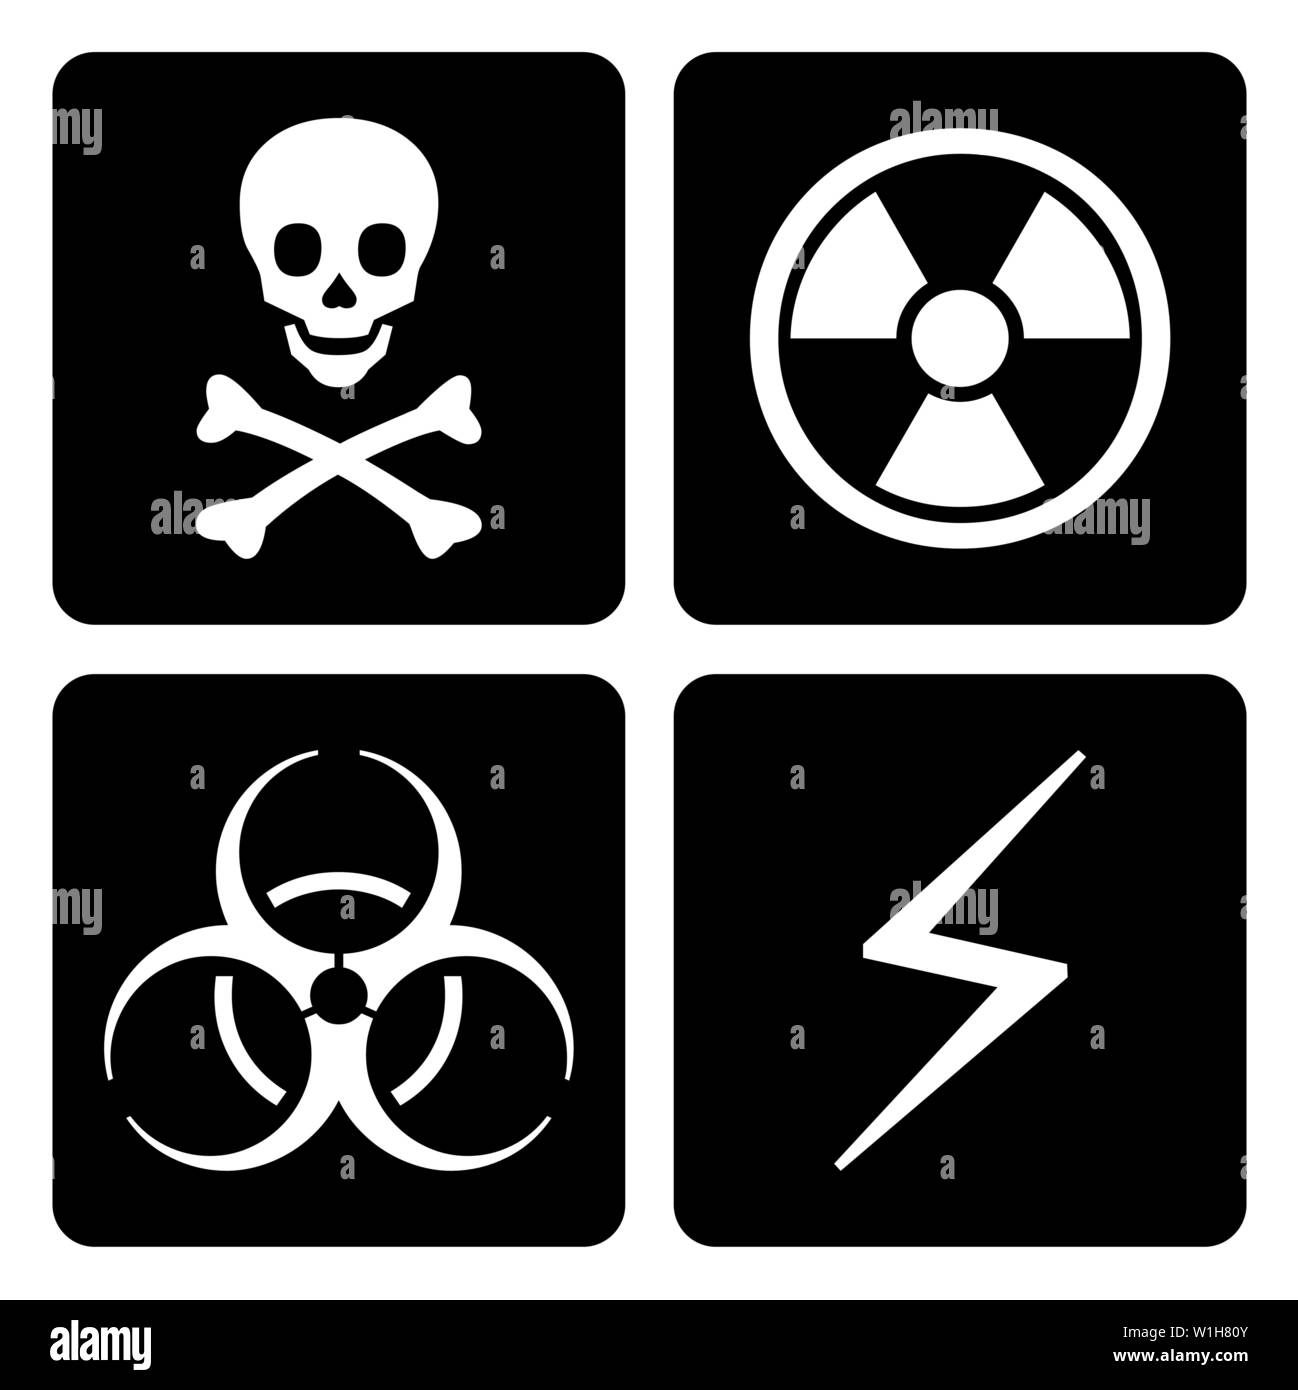 A Black and white Hazard icons set Stock Vector